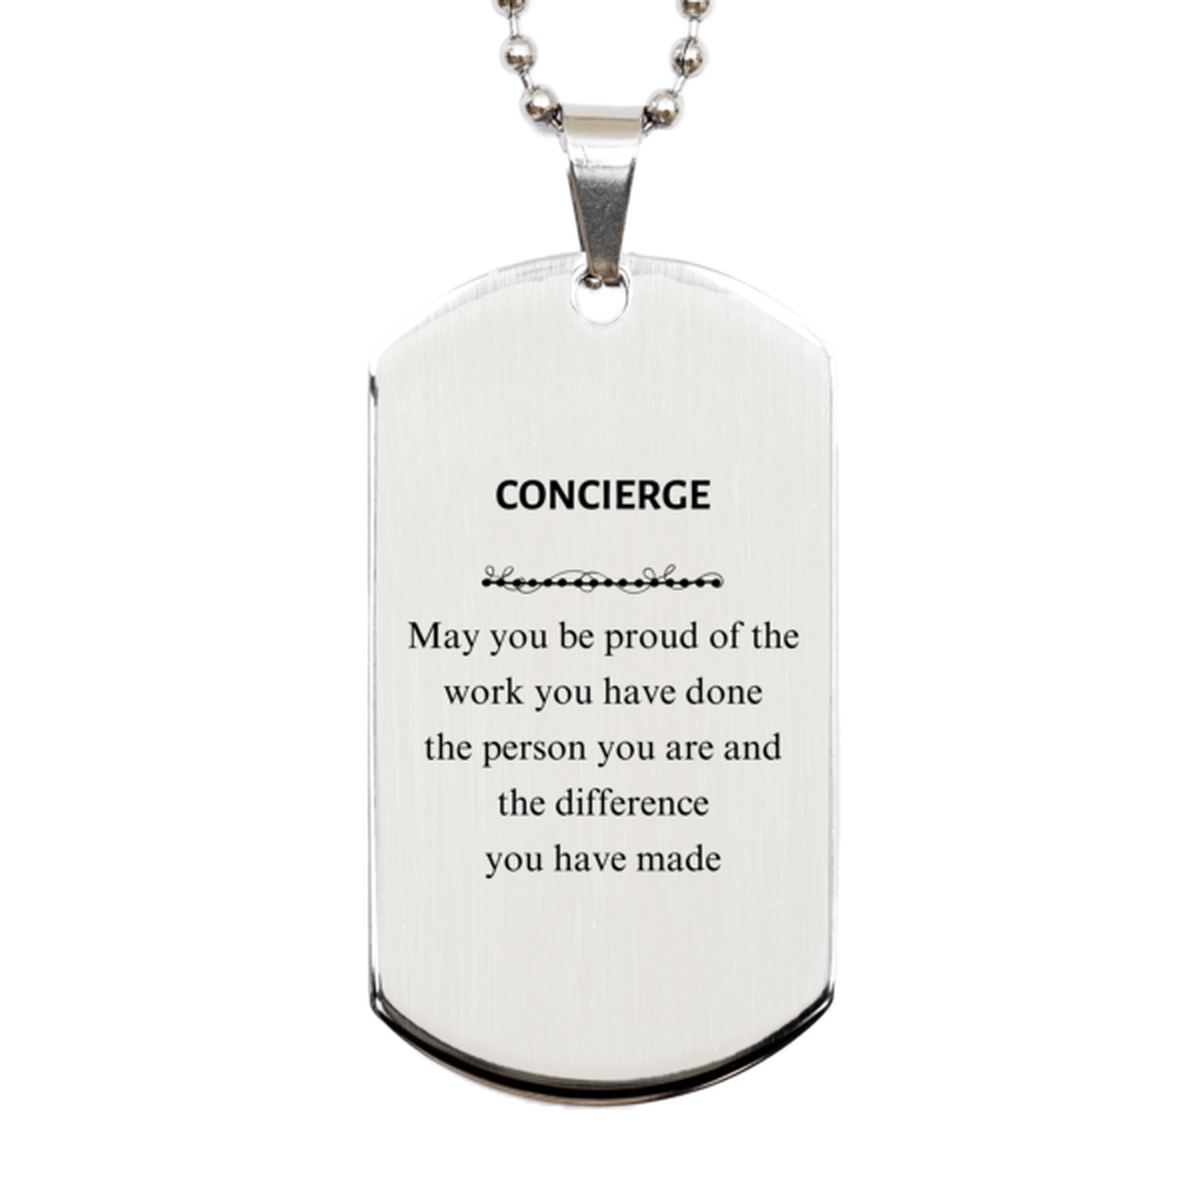 Concierge May you be proud of the work you have done, Retirement Concierge Silver Dog Tag for Colleague Appreciation Gifts Amazing for Concierge